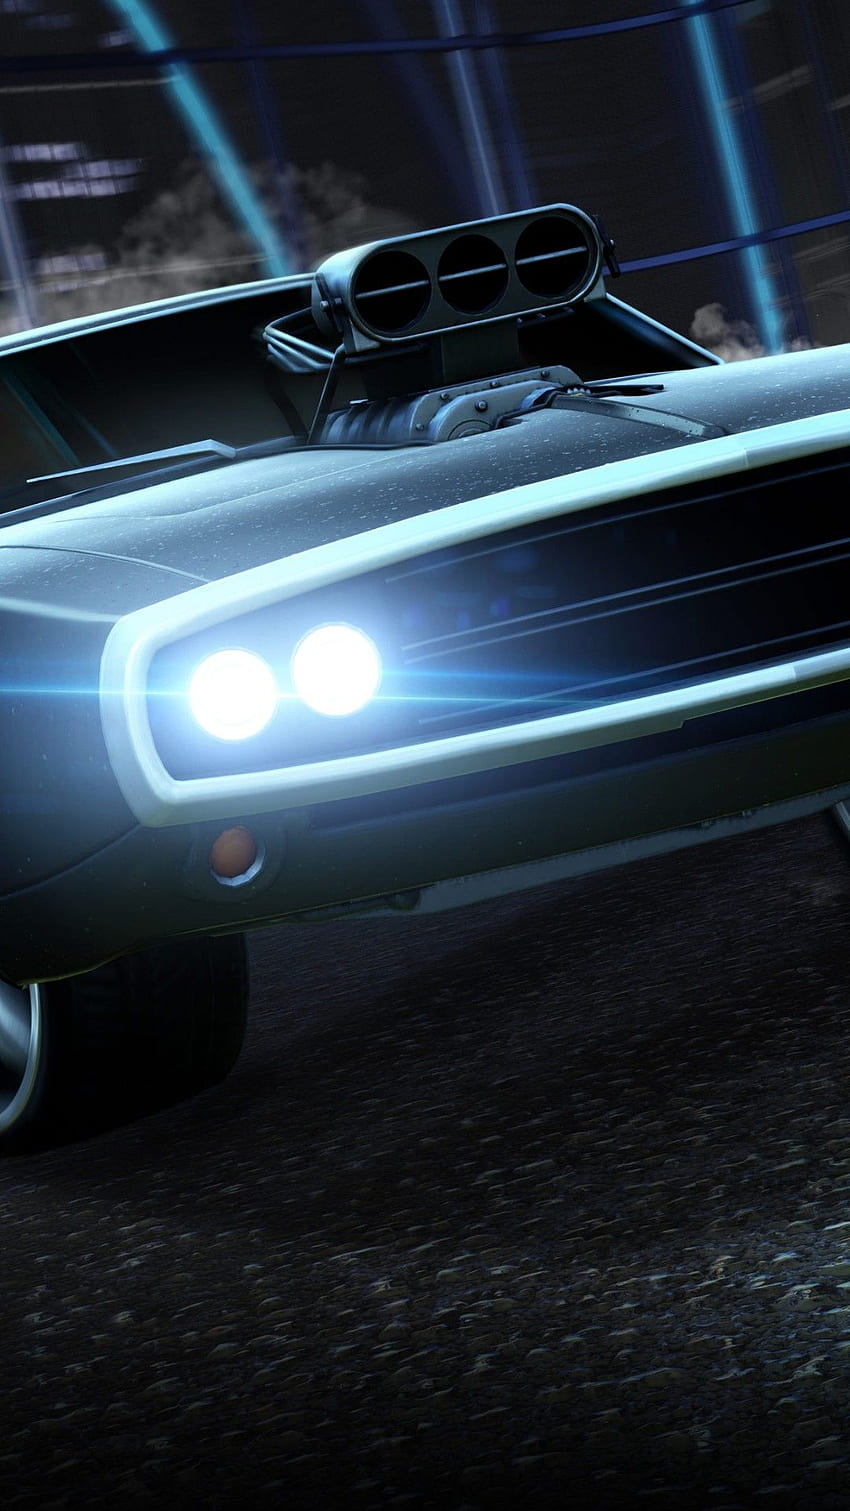 Fast and Furious wallpapers for iPhone in 2023 Free 4k download   iGeeksBlog